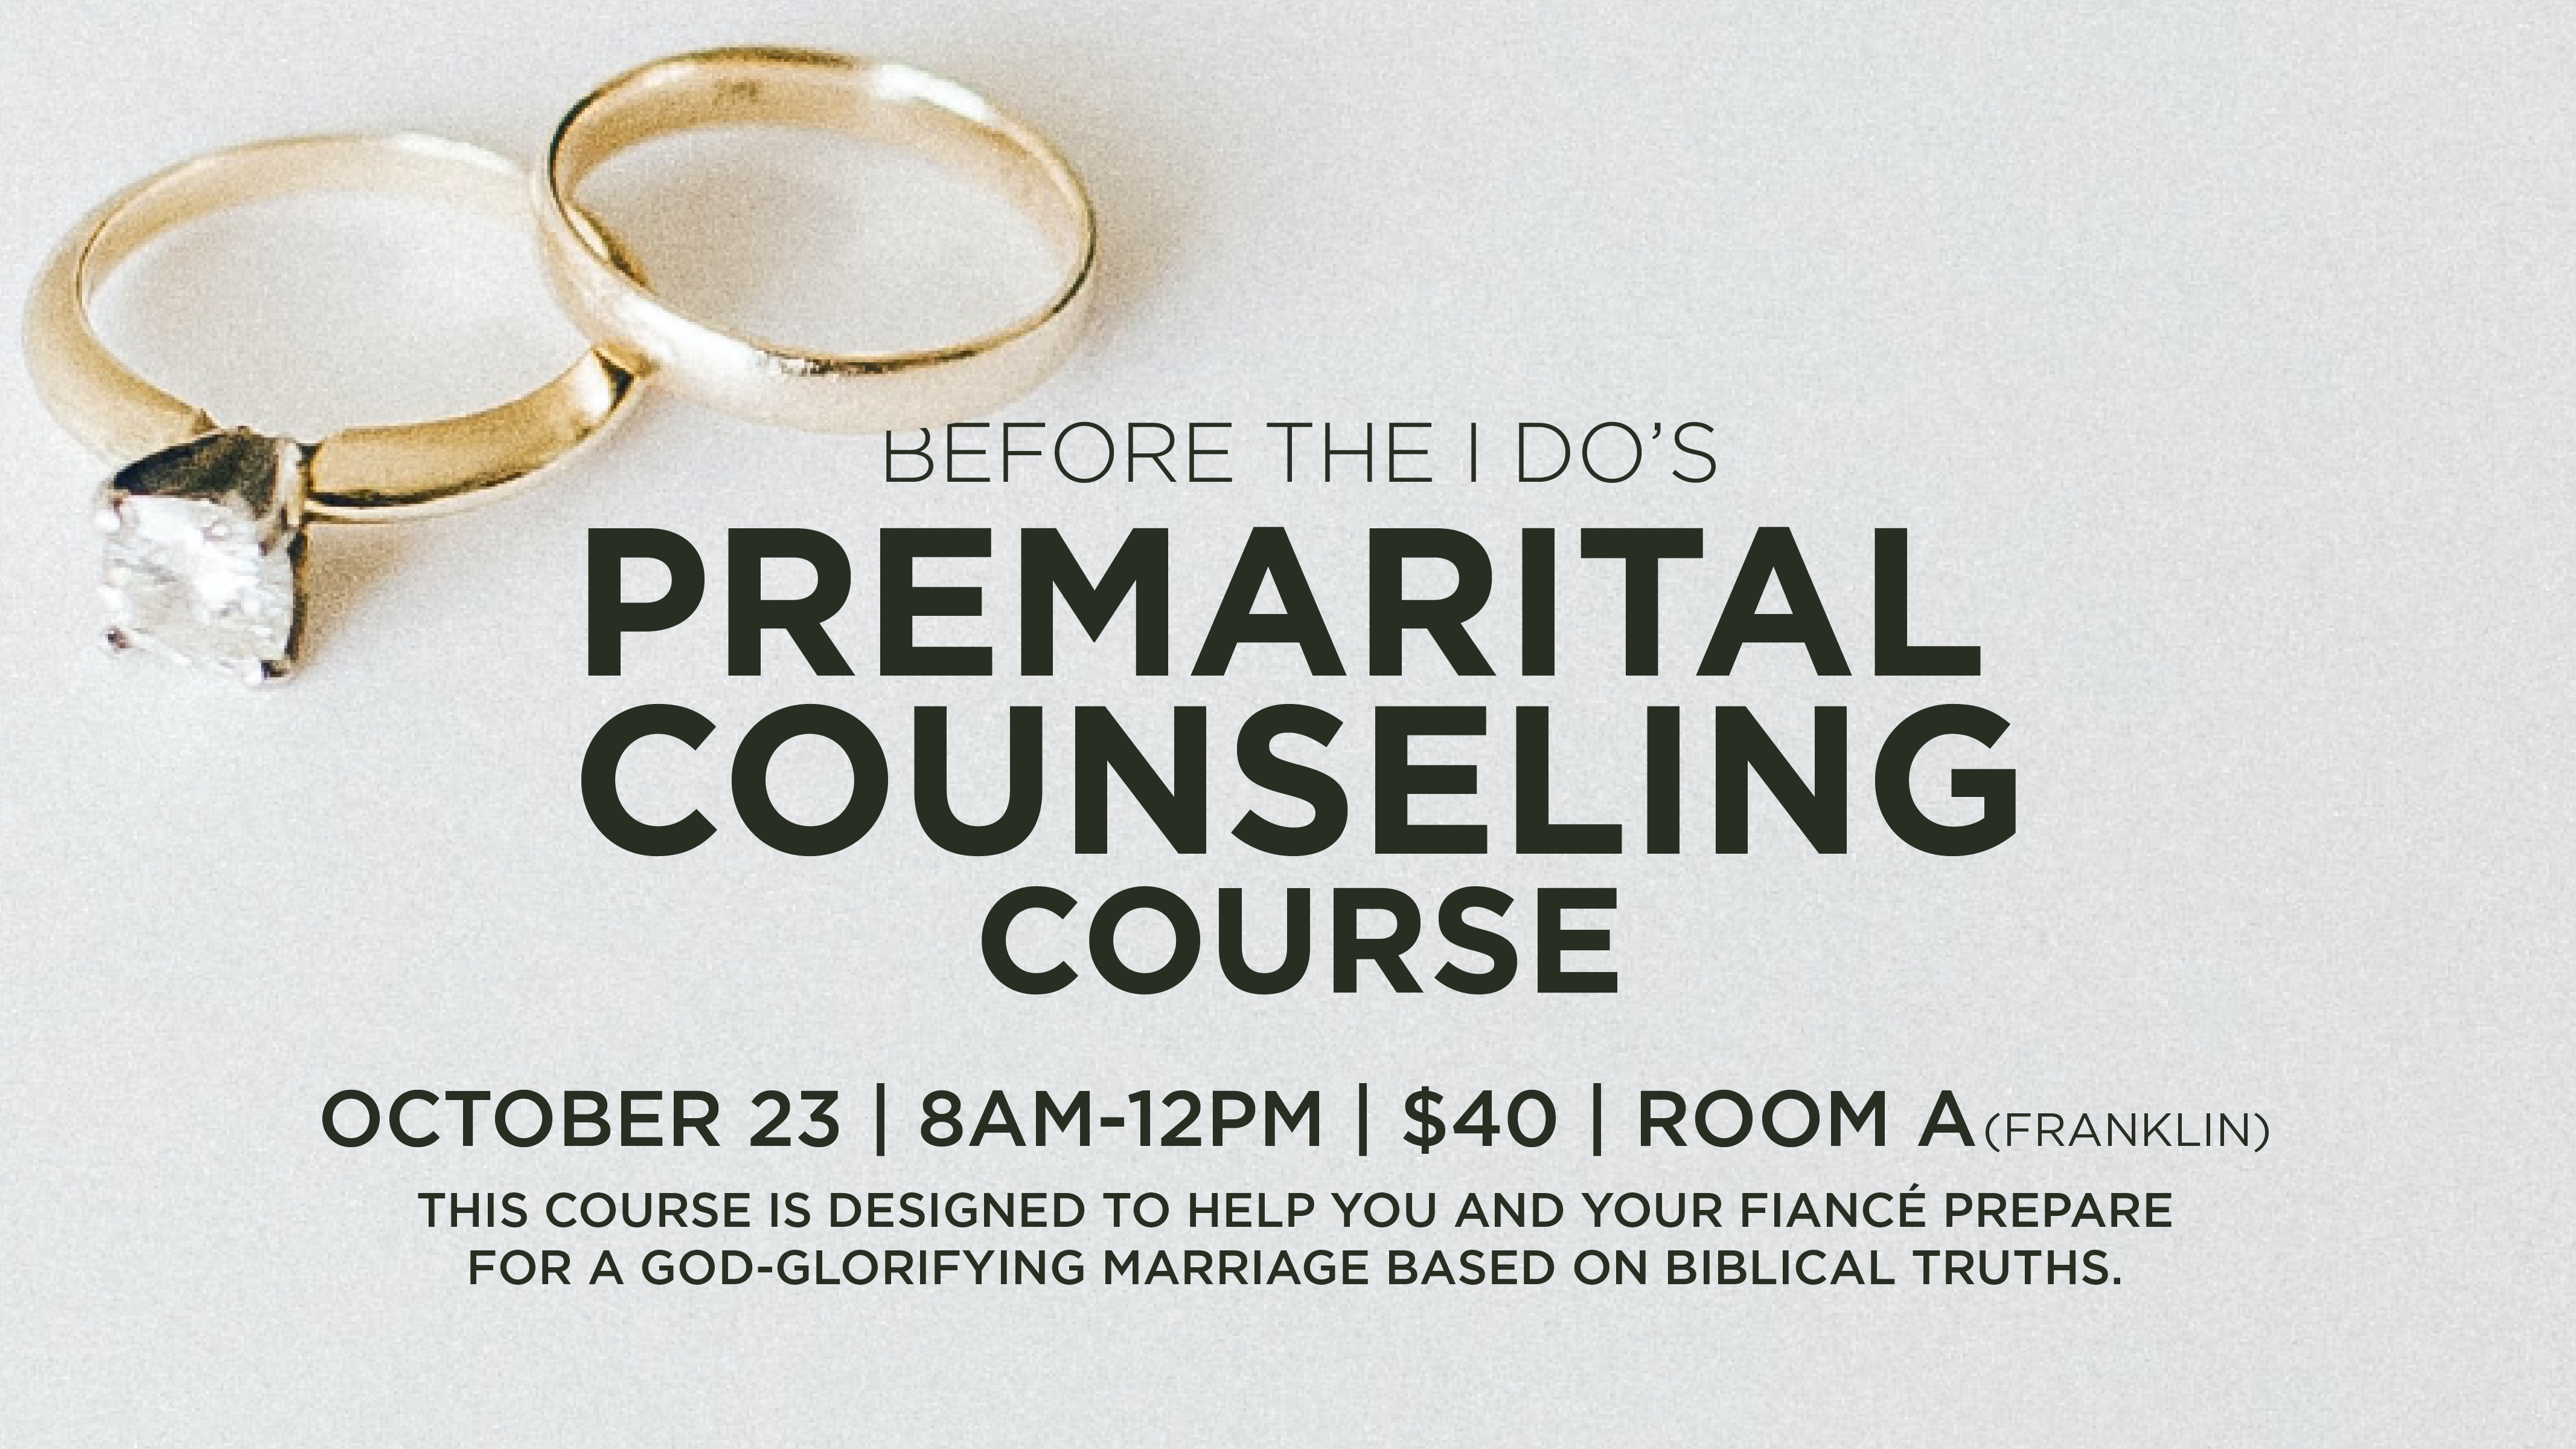 Premarital Counseling Course